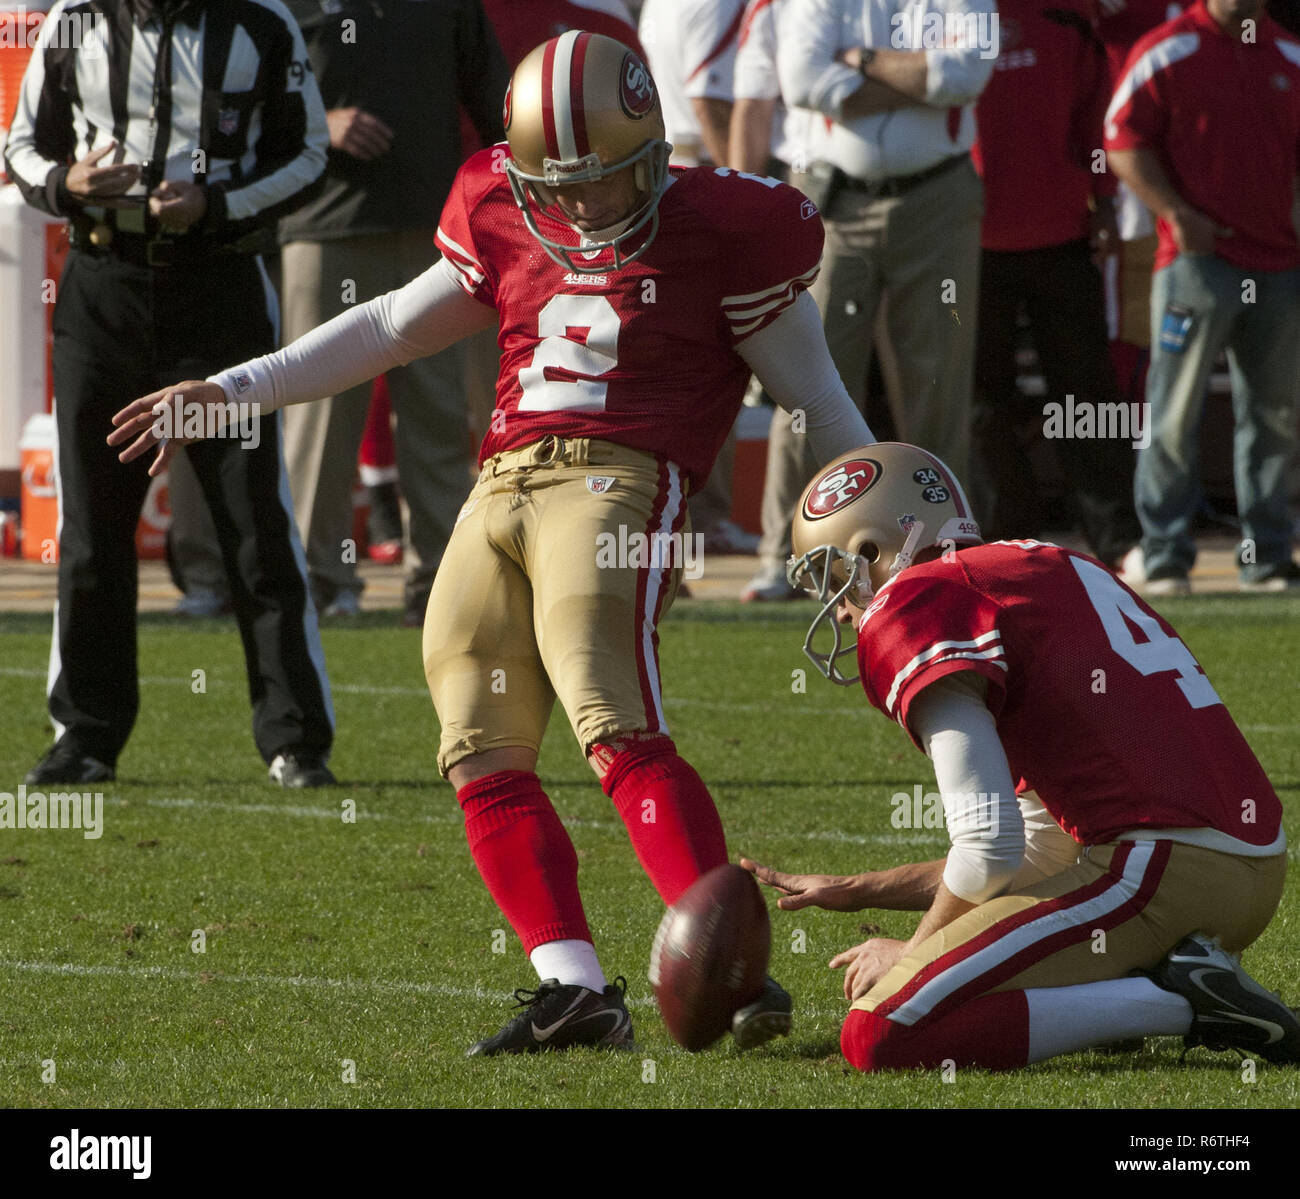 San Francisco, California, USA. 13th Nov, 2011. San Francisco 49ers kicker David Akers (2) makes one of his four field goals with punter Andy Lee (4) holding on Sunday, November 13, 2011 at Candlestick Park, San Francisco, California. The 49ers defeated the Giants 27-20. Credit: Al Golub/ZUMA Wire/Alamy Live News Stock Photo